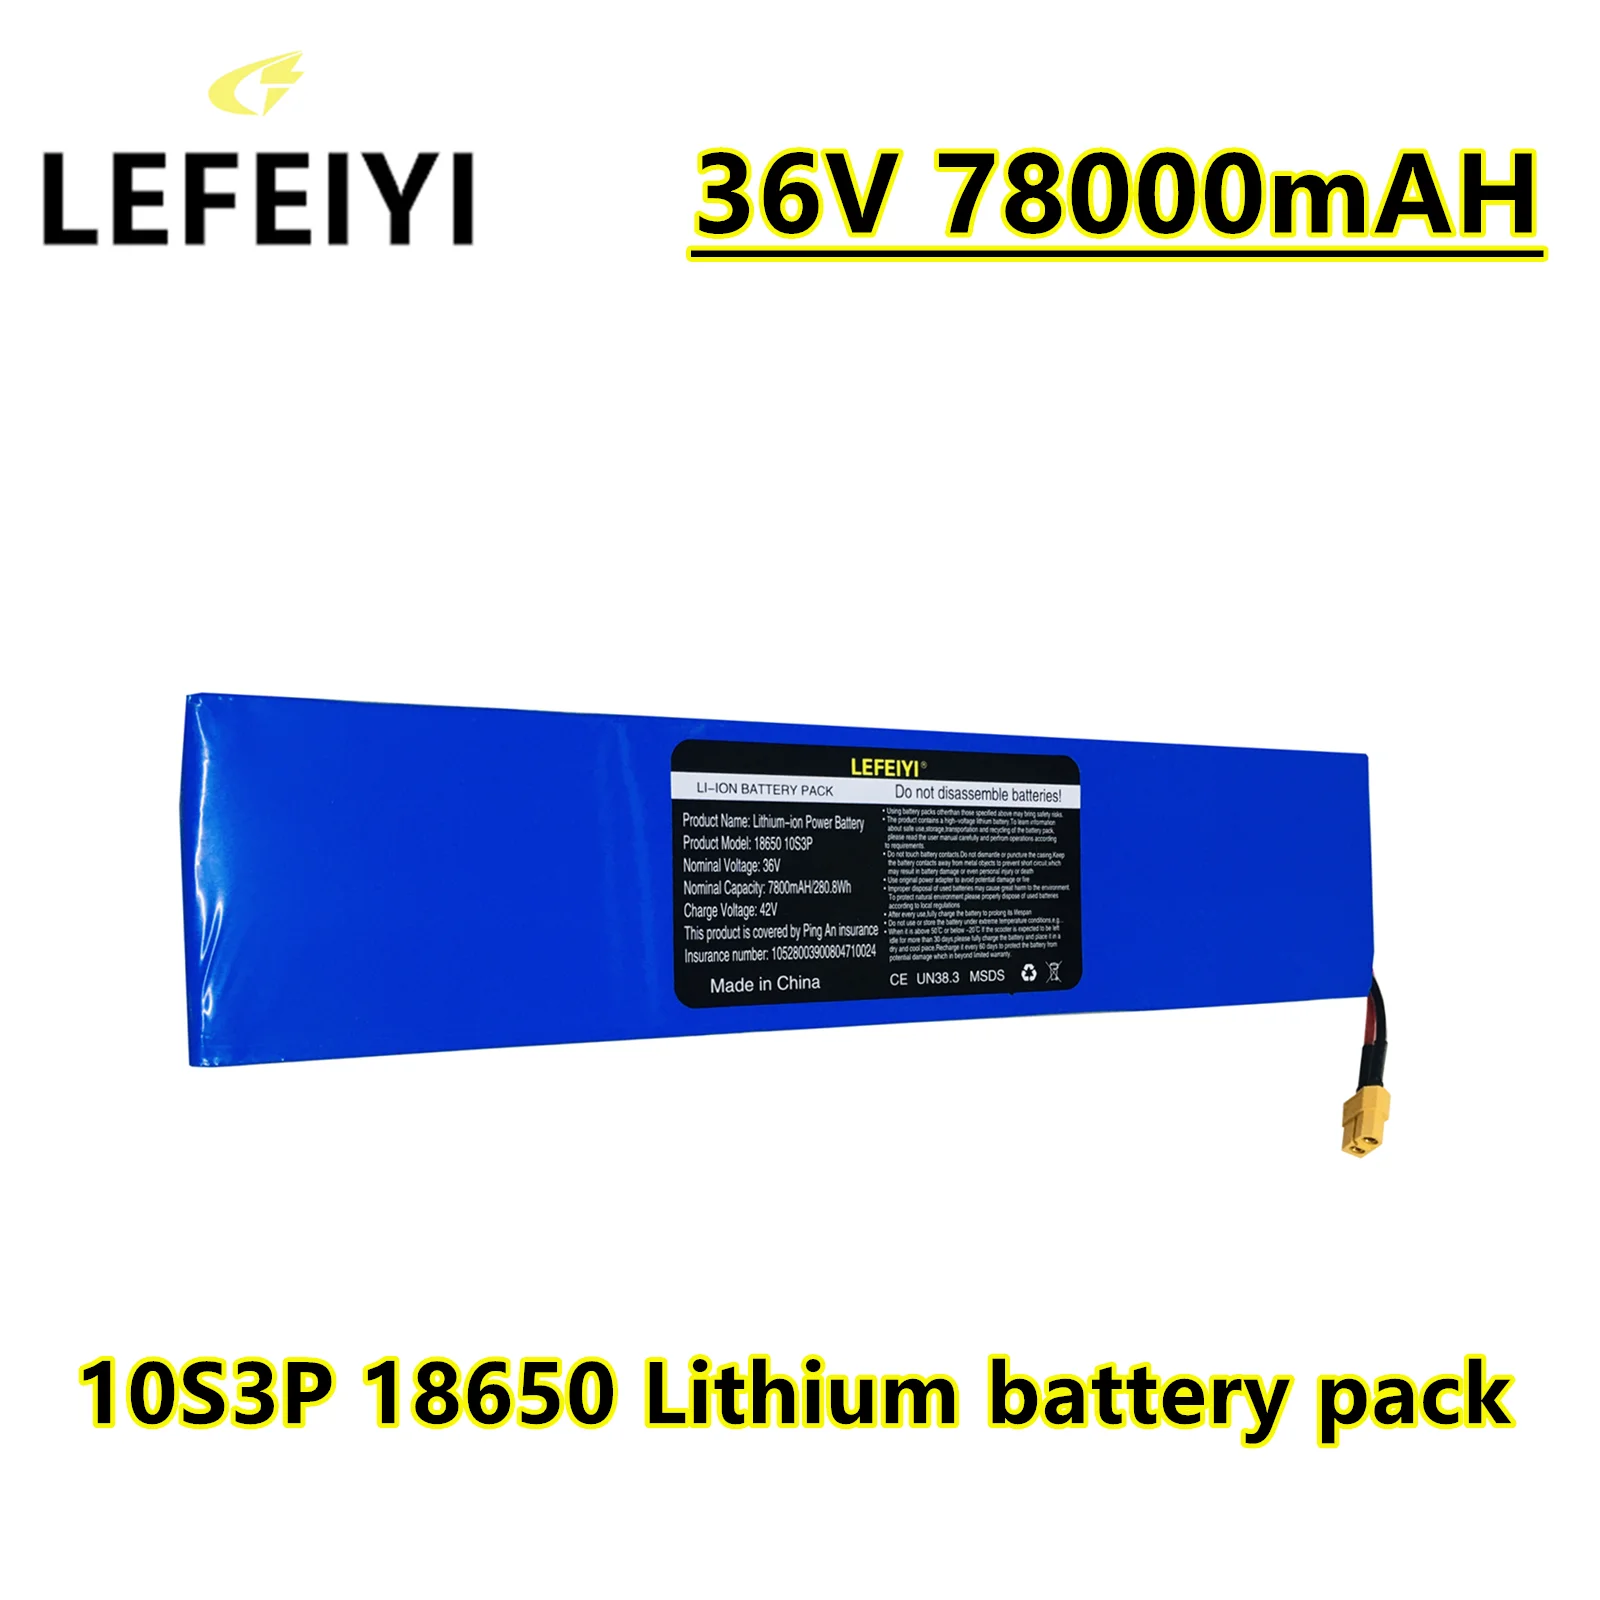 10S3P 36V 7800mAH 18650 Lithium Ion Battery Pack  500W hHigh Power And Large Capacity For 36/42V Motorcycle Scooter